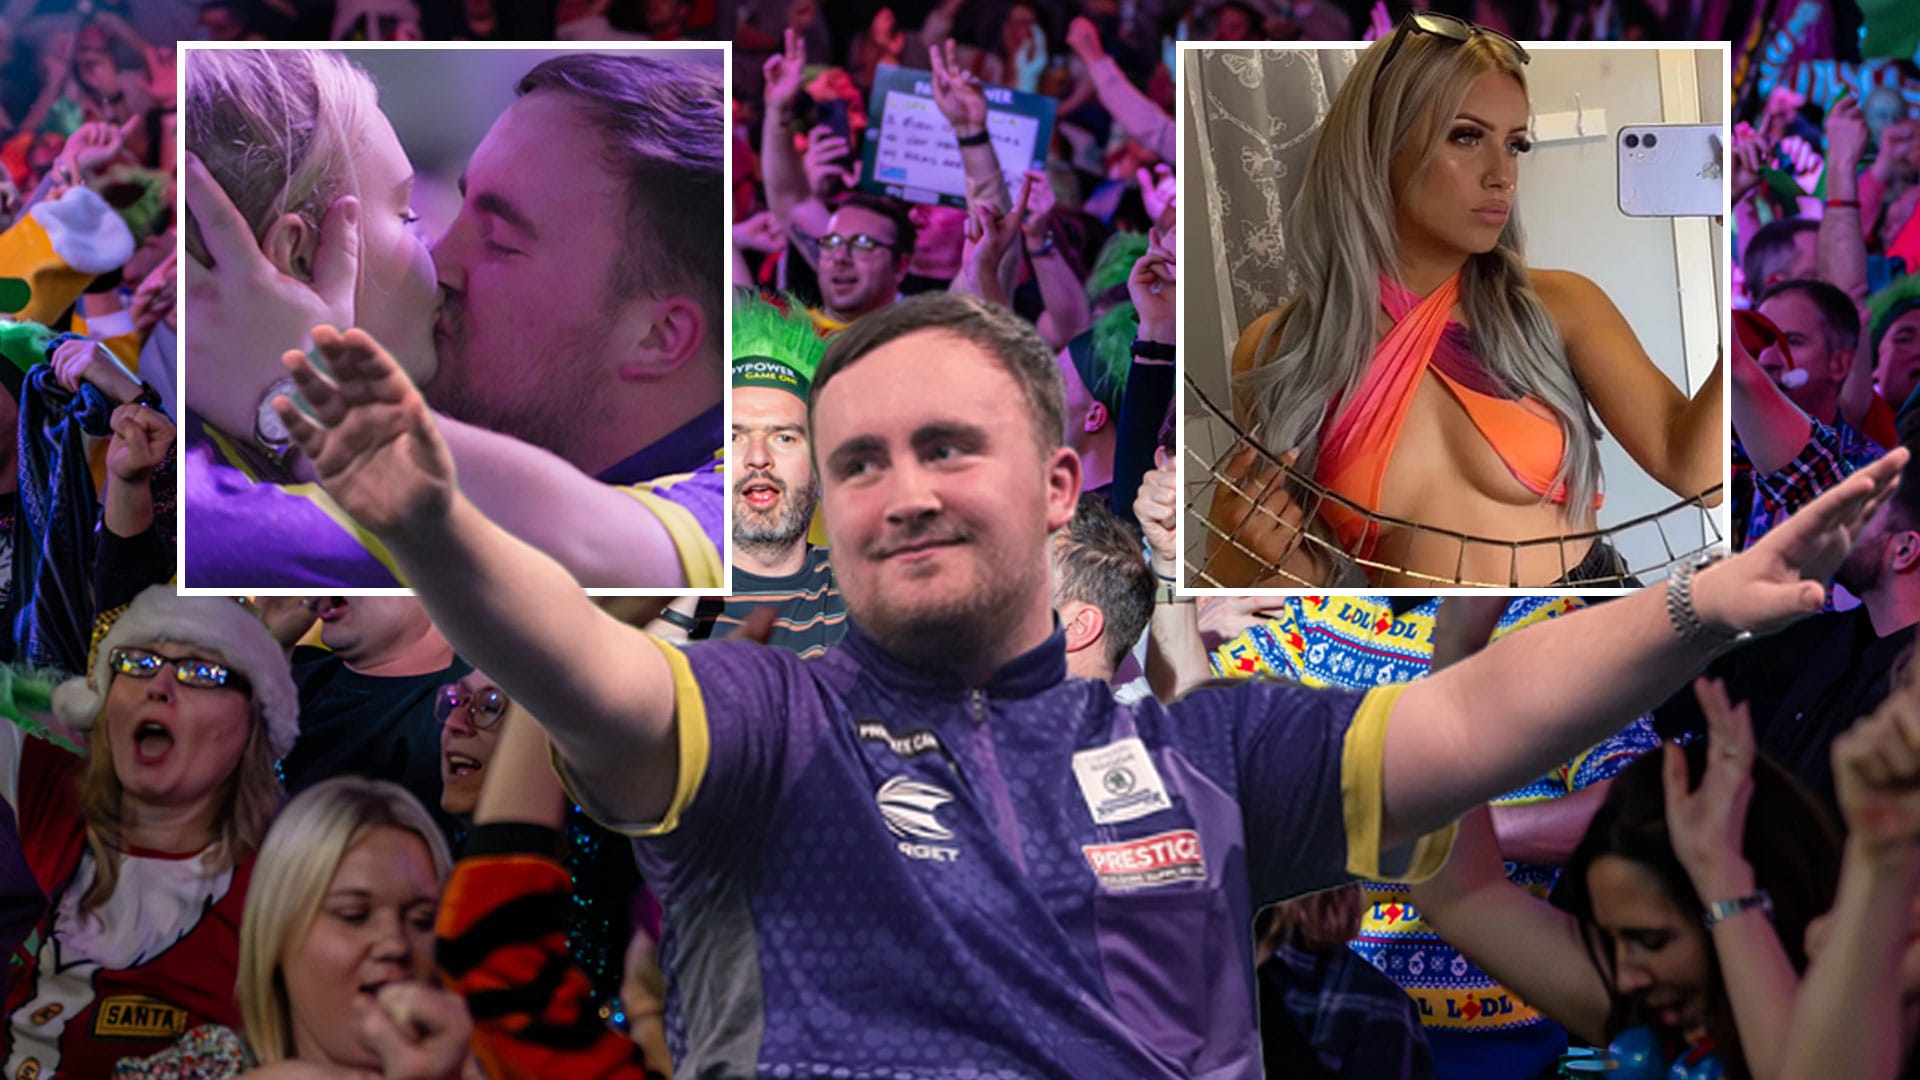 Darts wonderkid Littler, 16, celebrates historic win with kiss from girlfriend, 21, before sister posts touching message